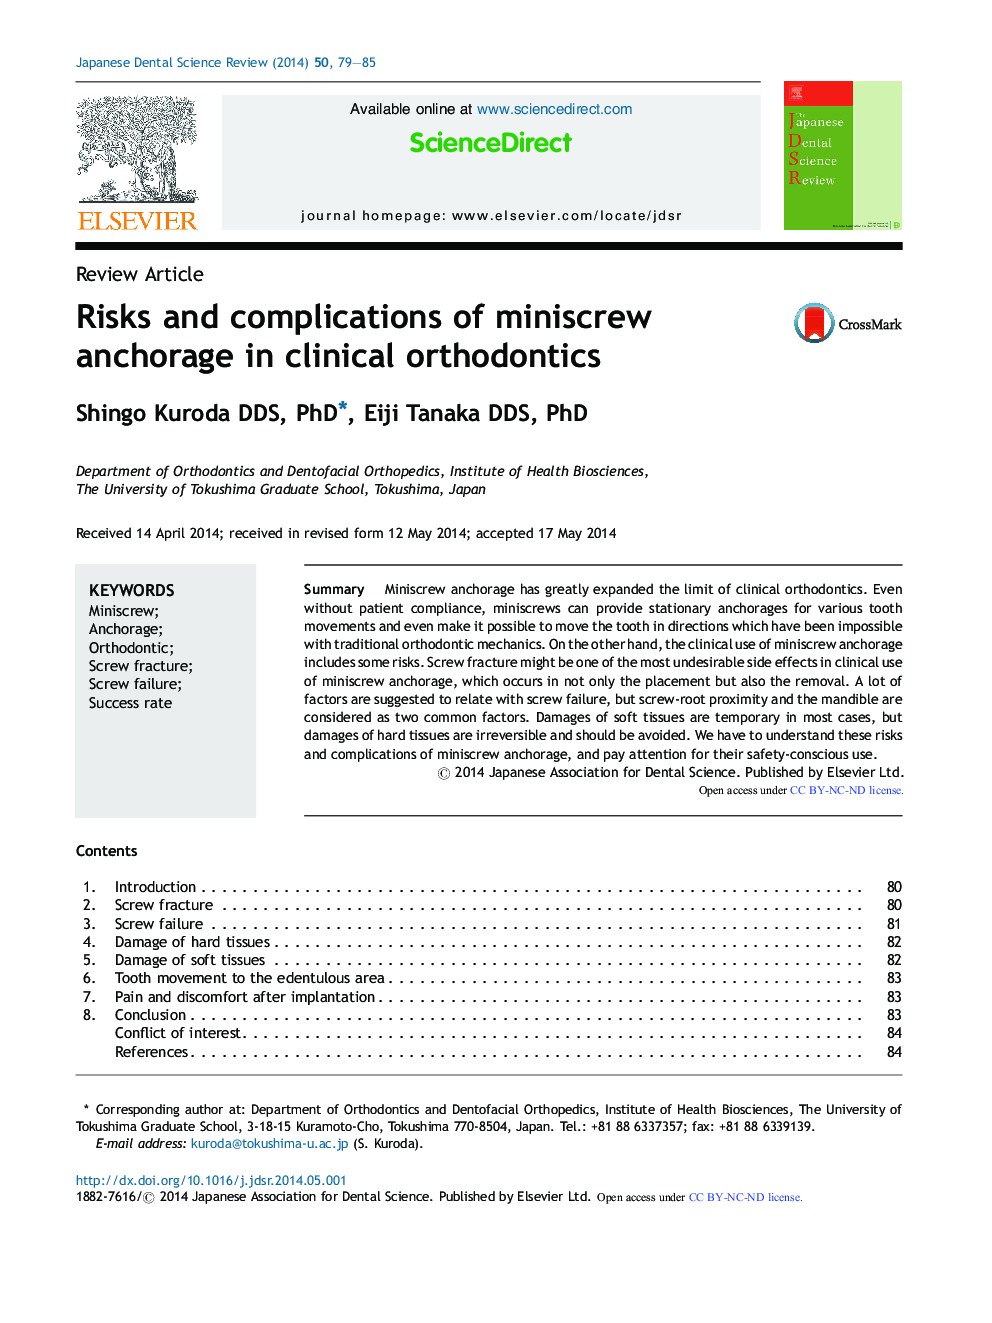 Risks and complications of miniscrew anchorage in clinical orthodontics